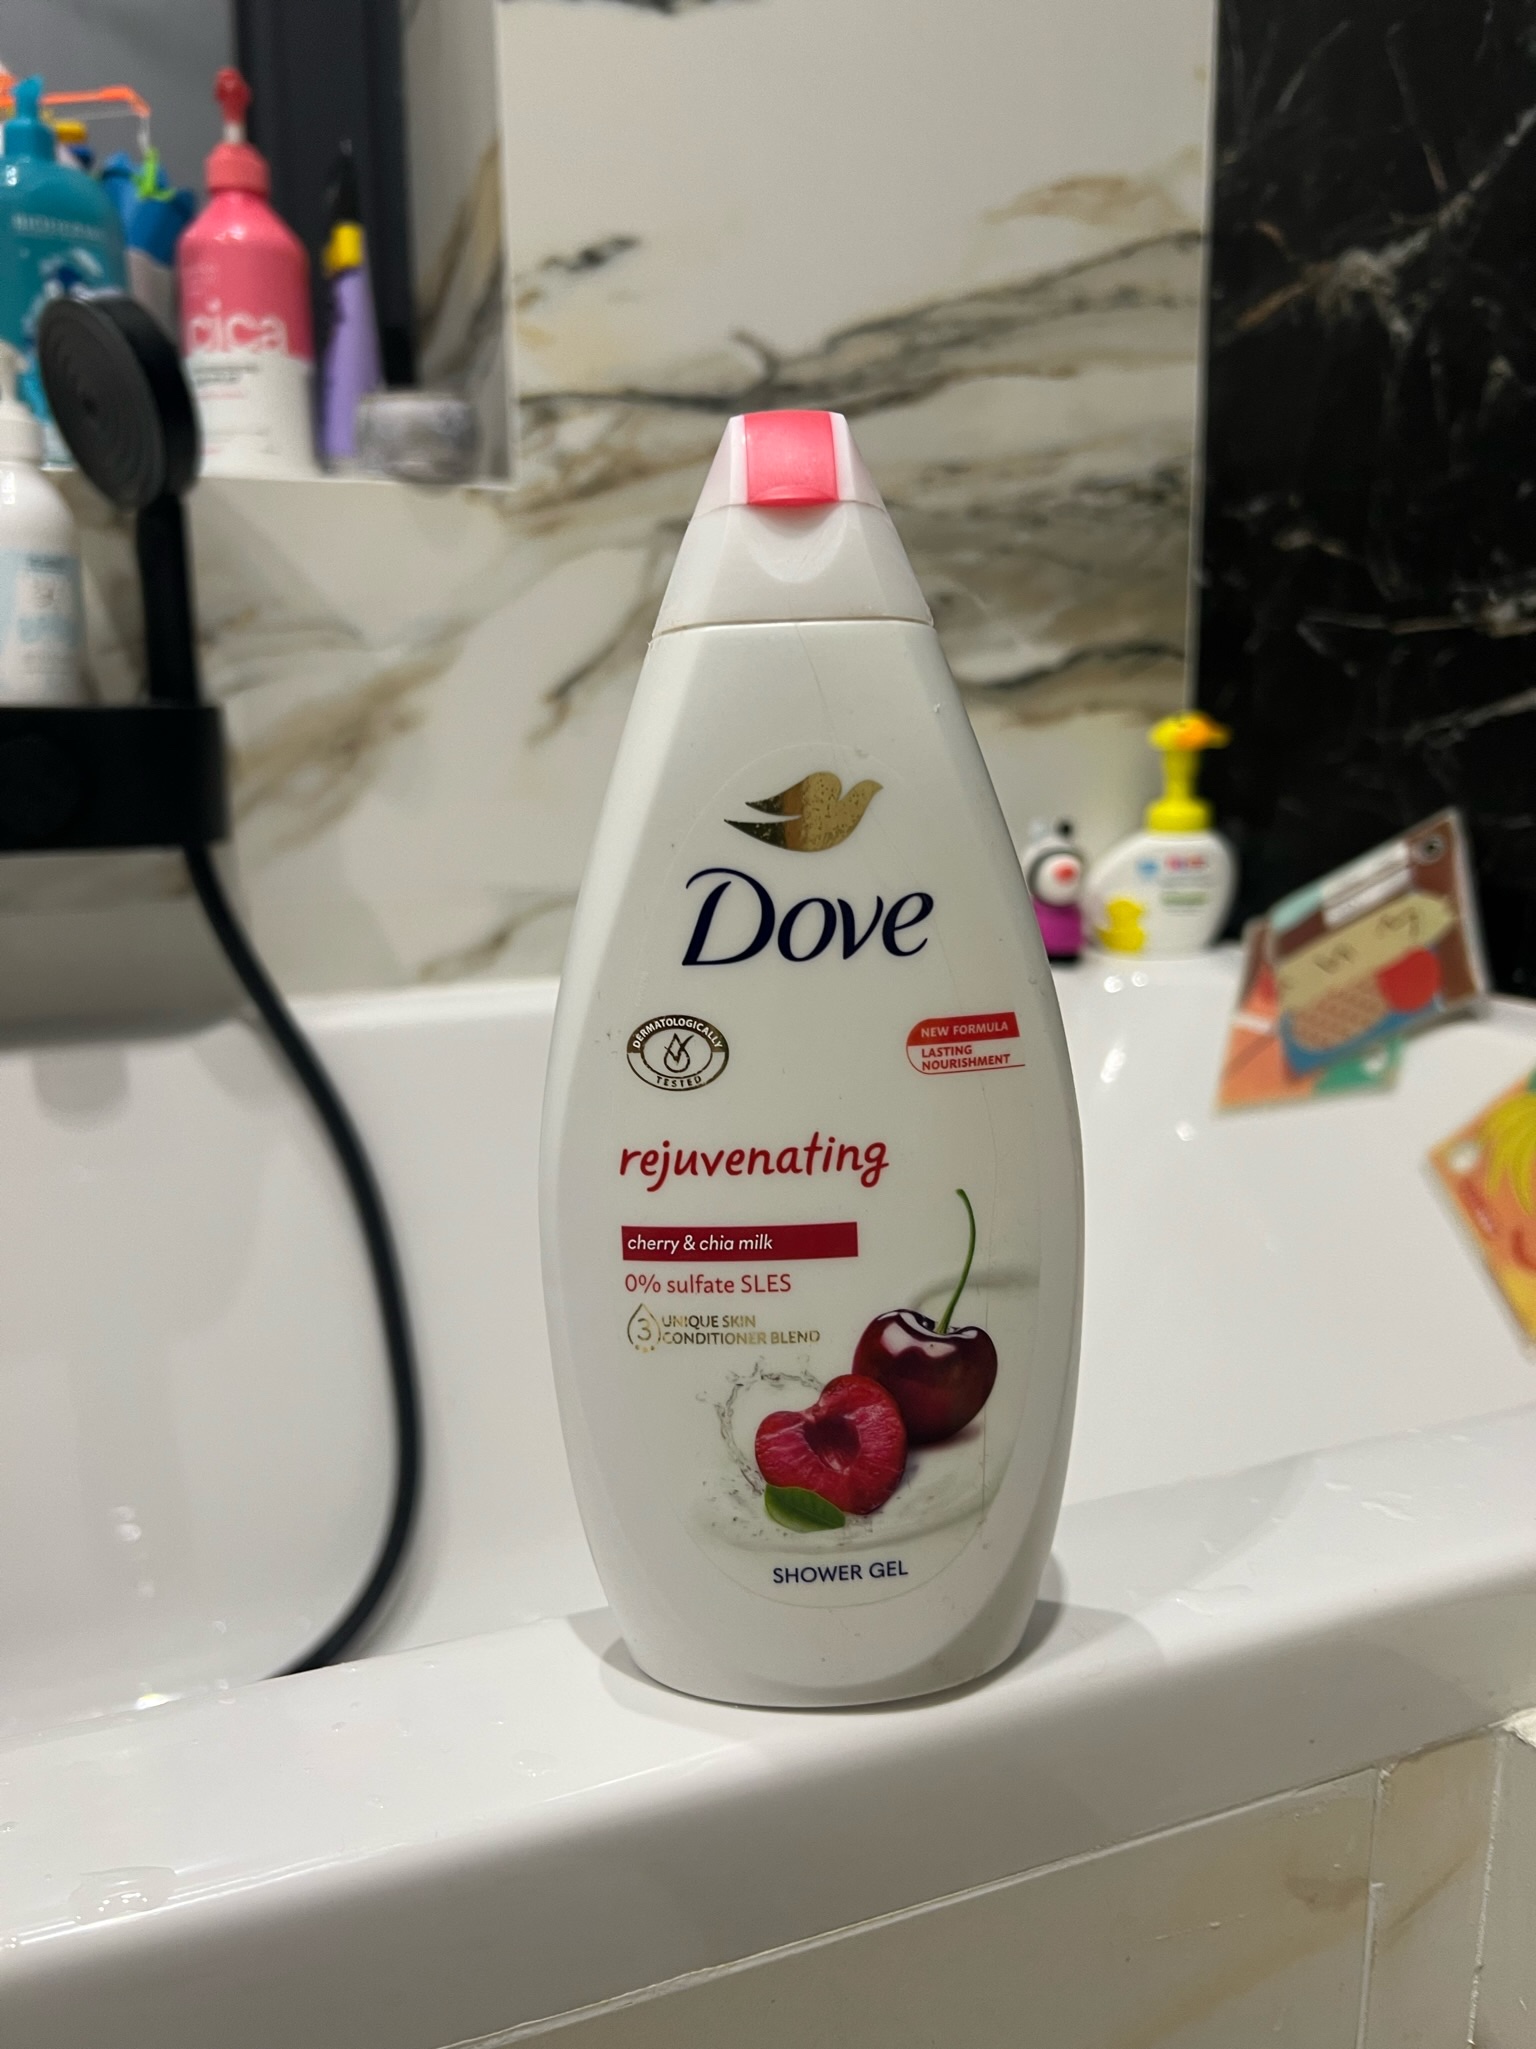 Review: A Luxurious Shower Experience on a Budget with Dove Rejuvenating Cherry & Chia Milk Body Wash